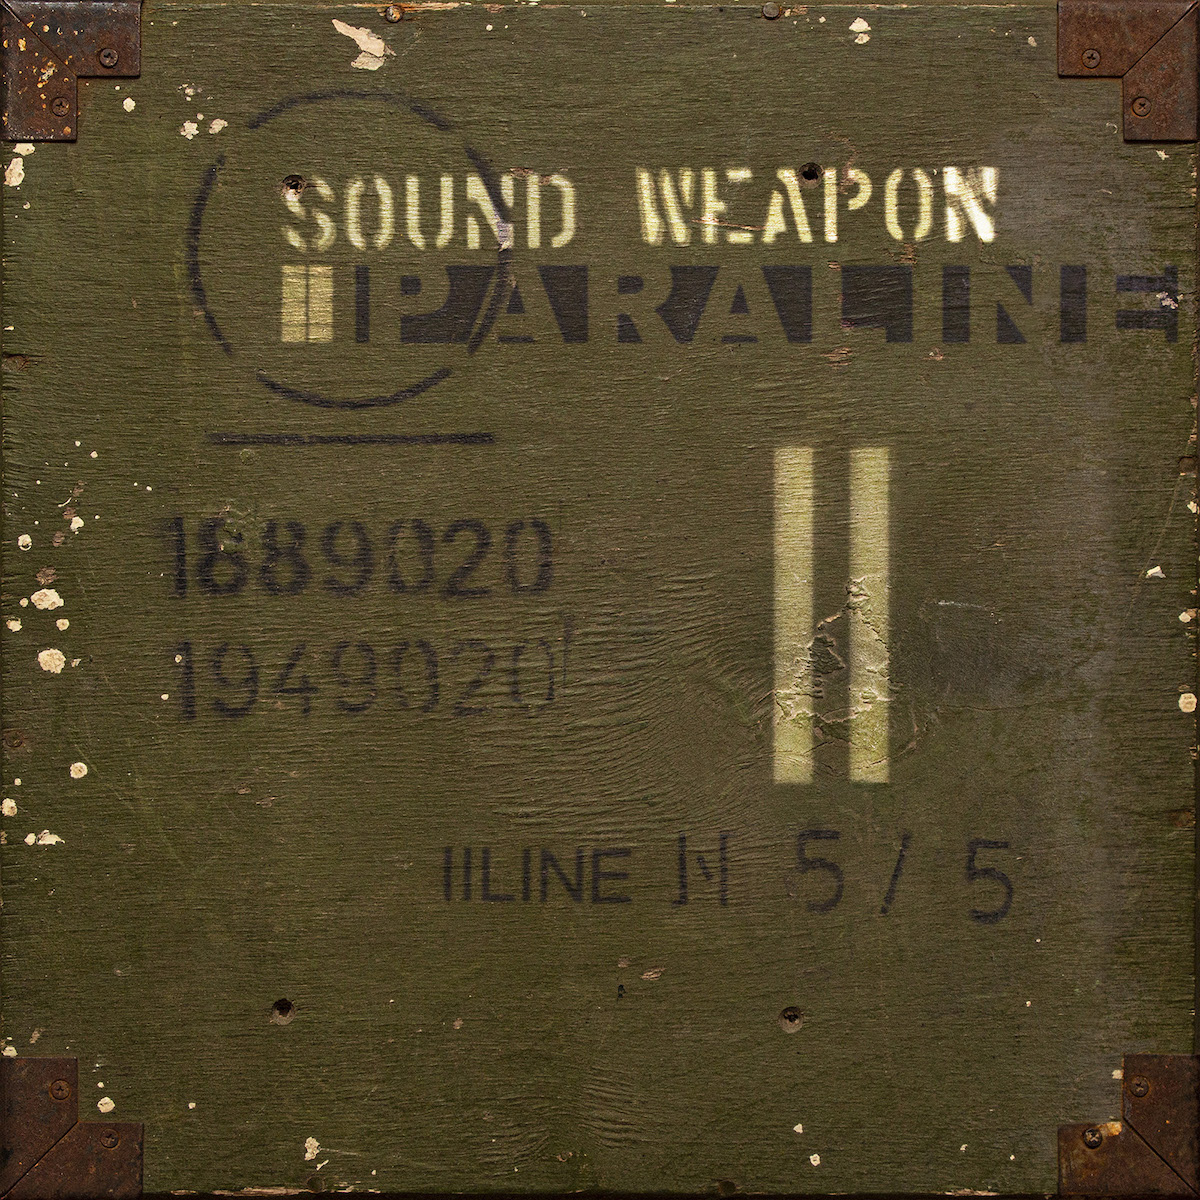 ALBUM REVIEW: Sound Weapon by Paraline